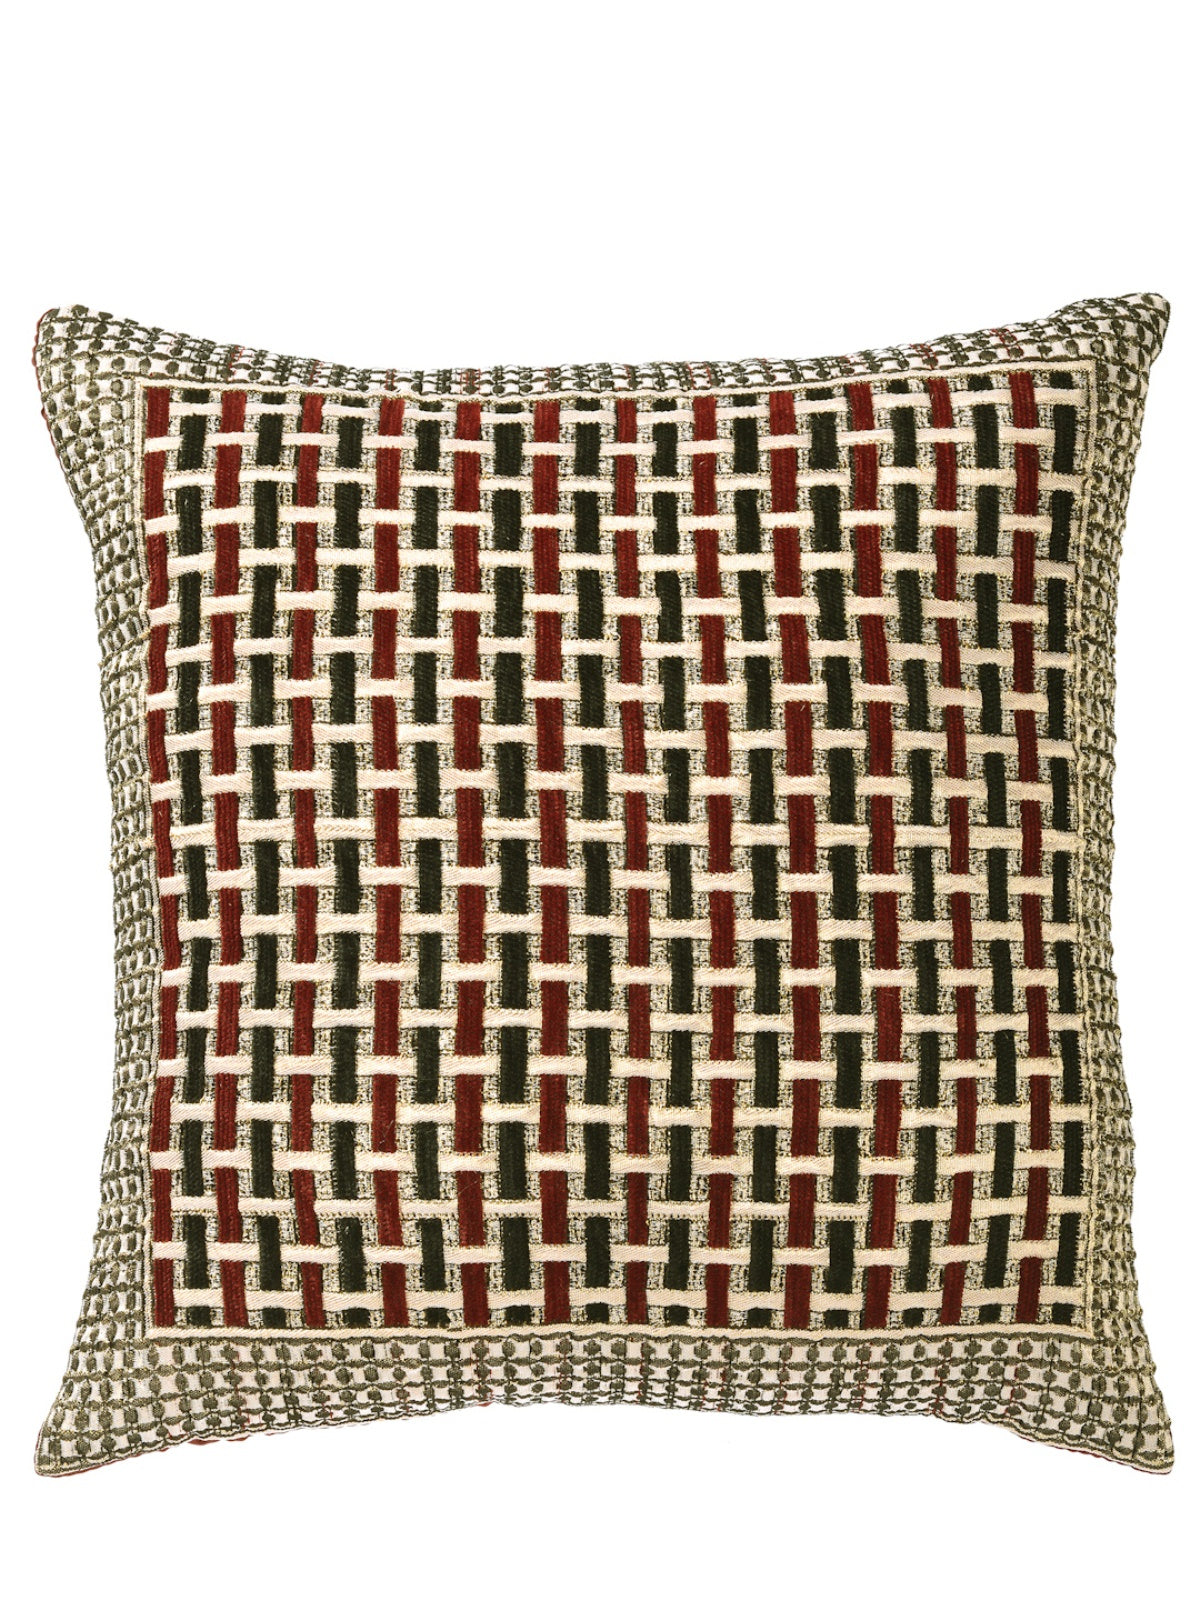 Soft Chenille Fabric Geometric Cushion Cover 16 inch x 16 inch, Set of 5 - Gold & Maroon